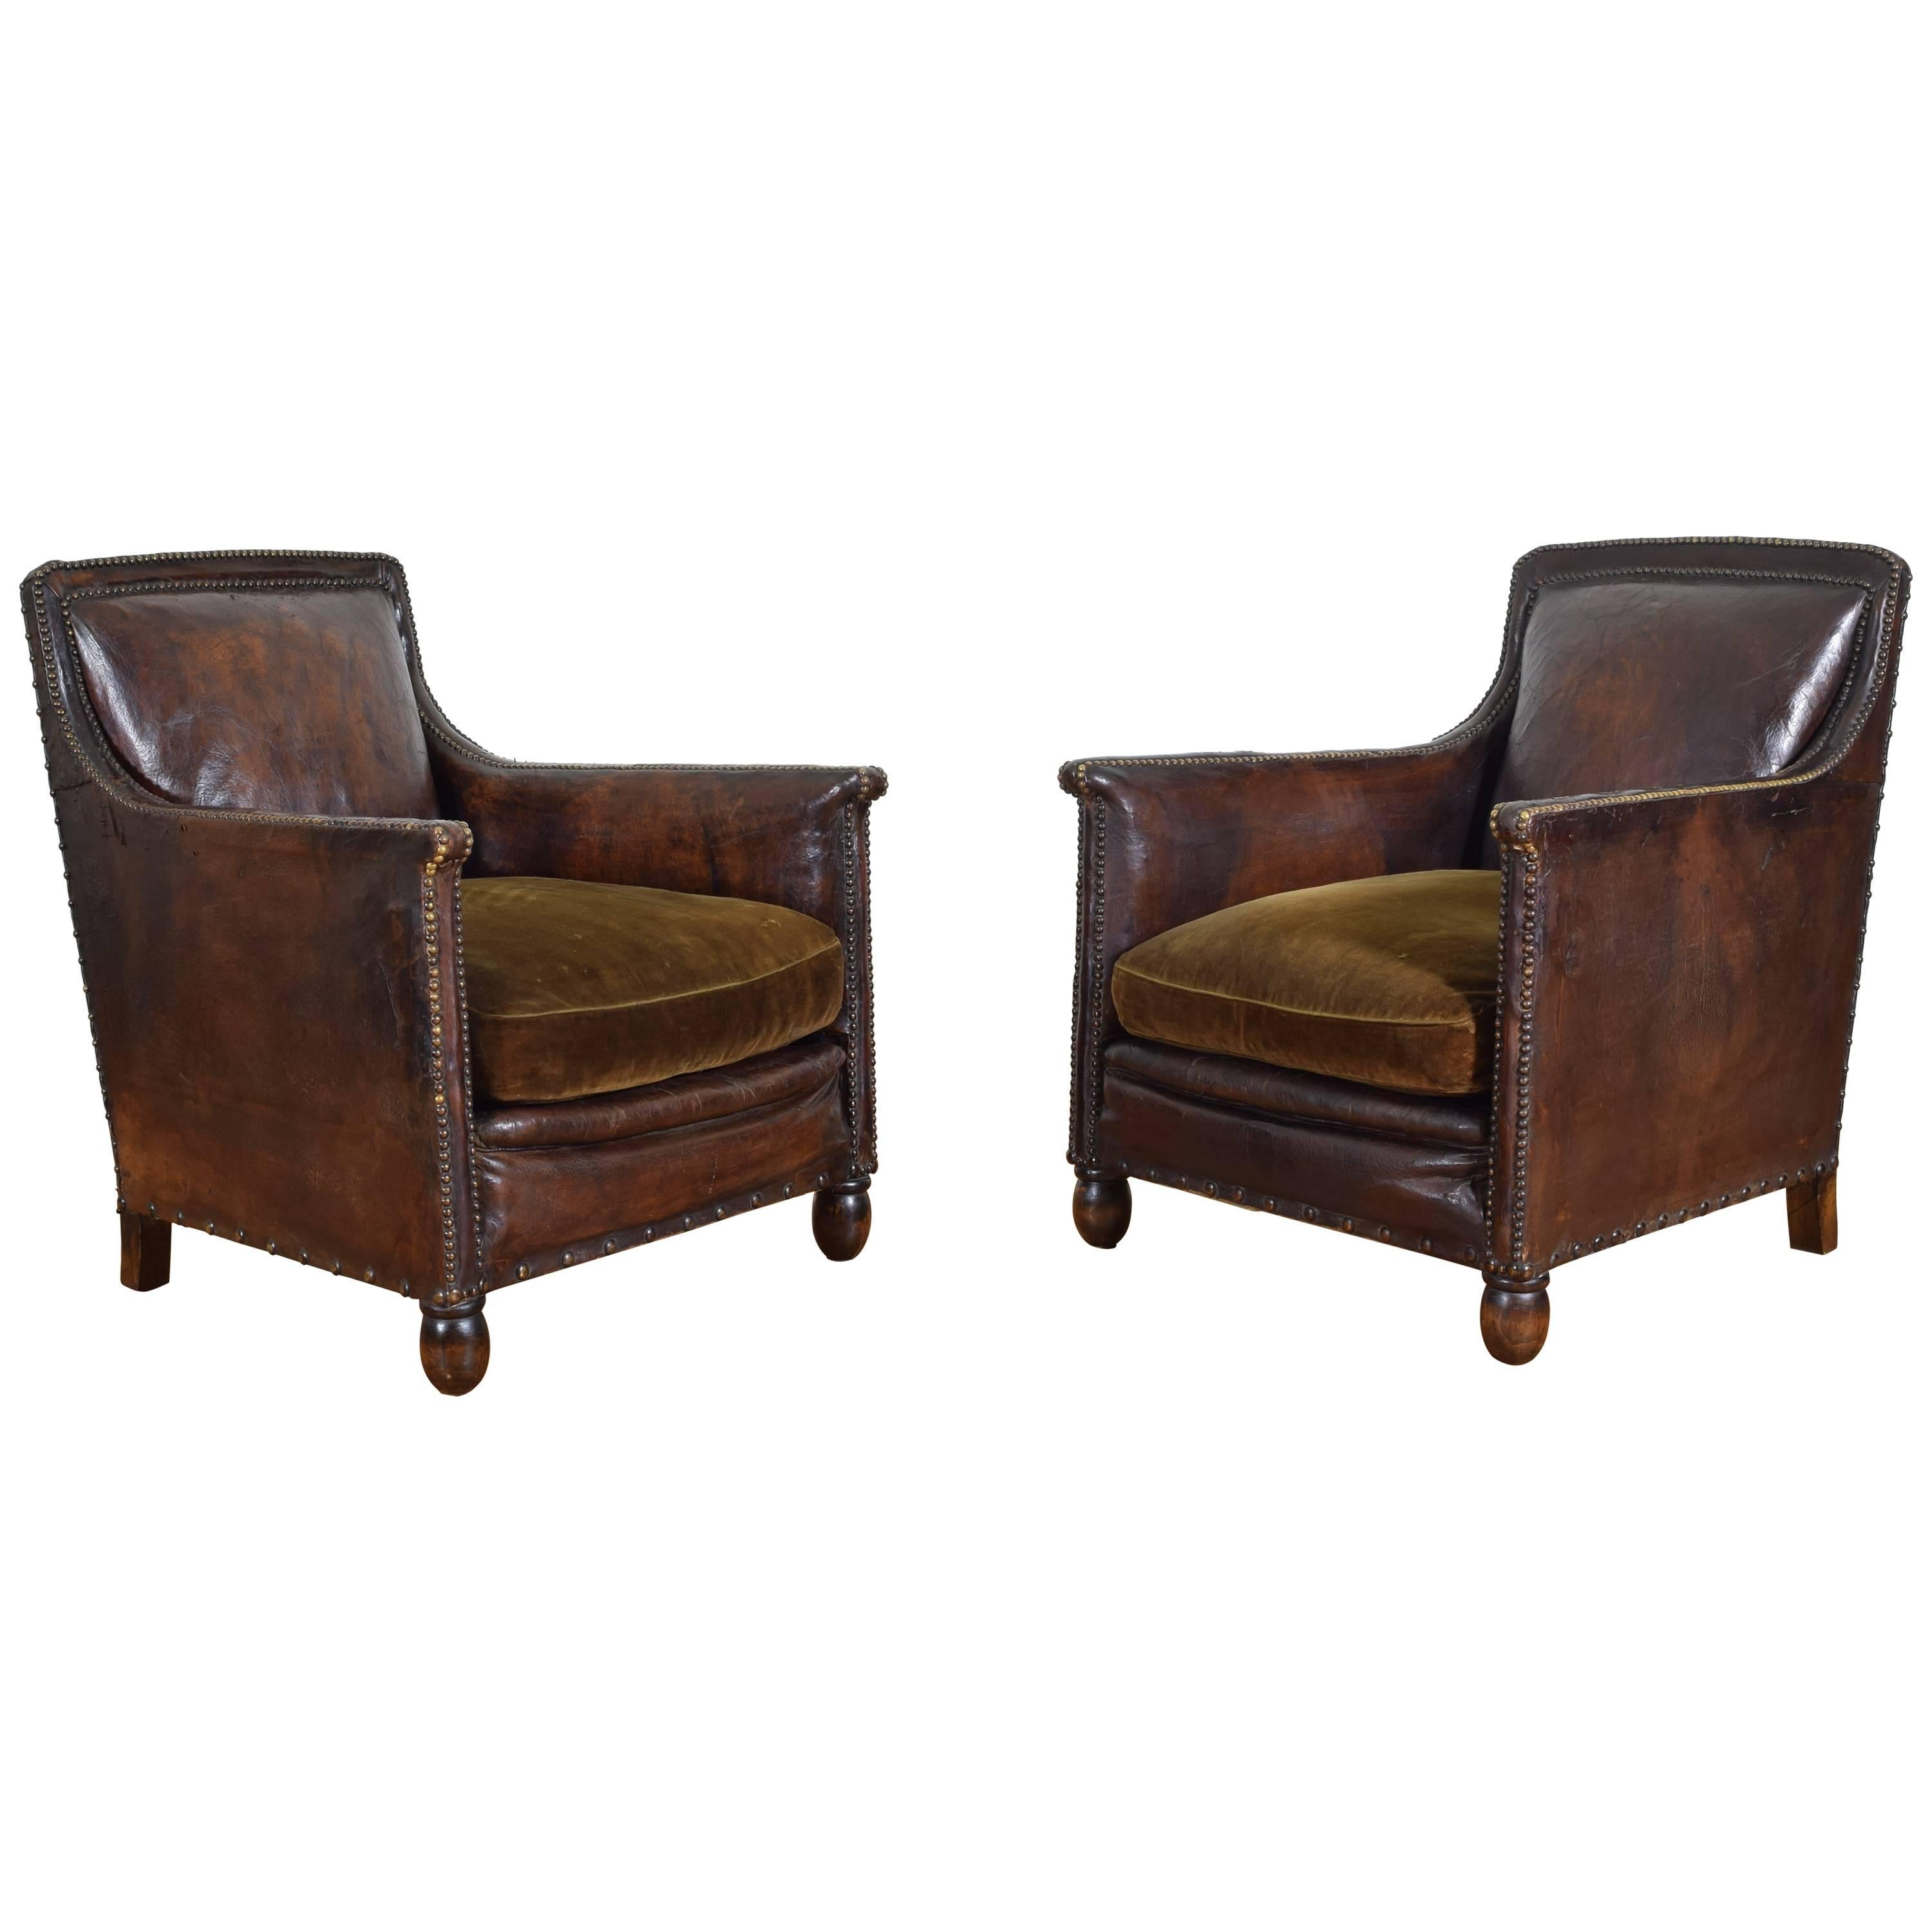 Pair of English Leather and Velvet Upholstered Club Chairs, circa 1910